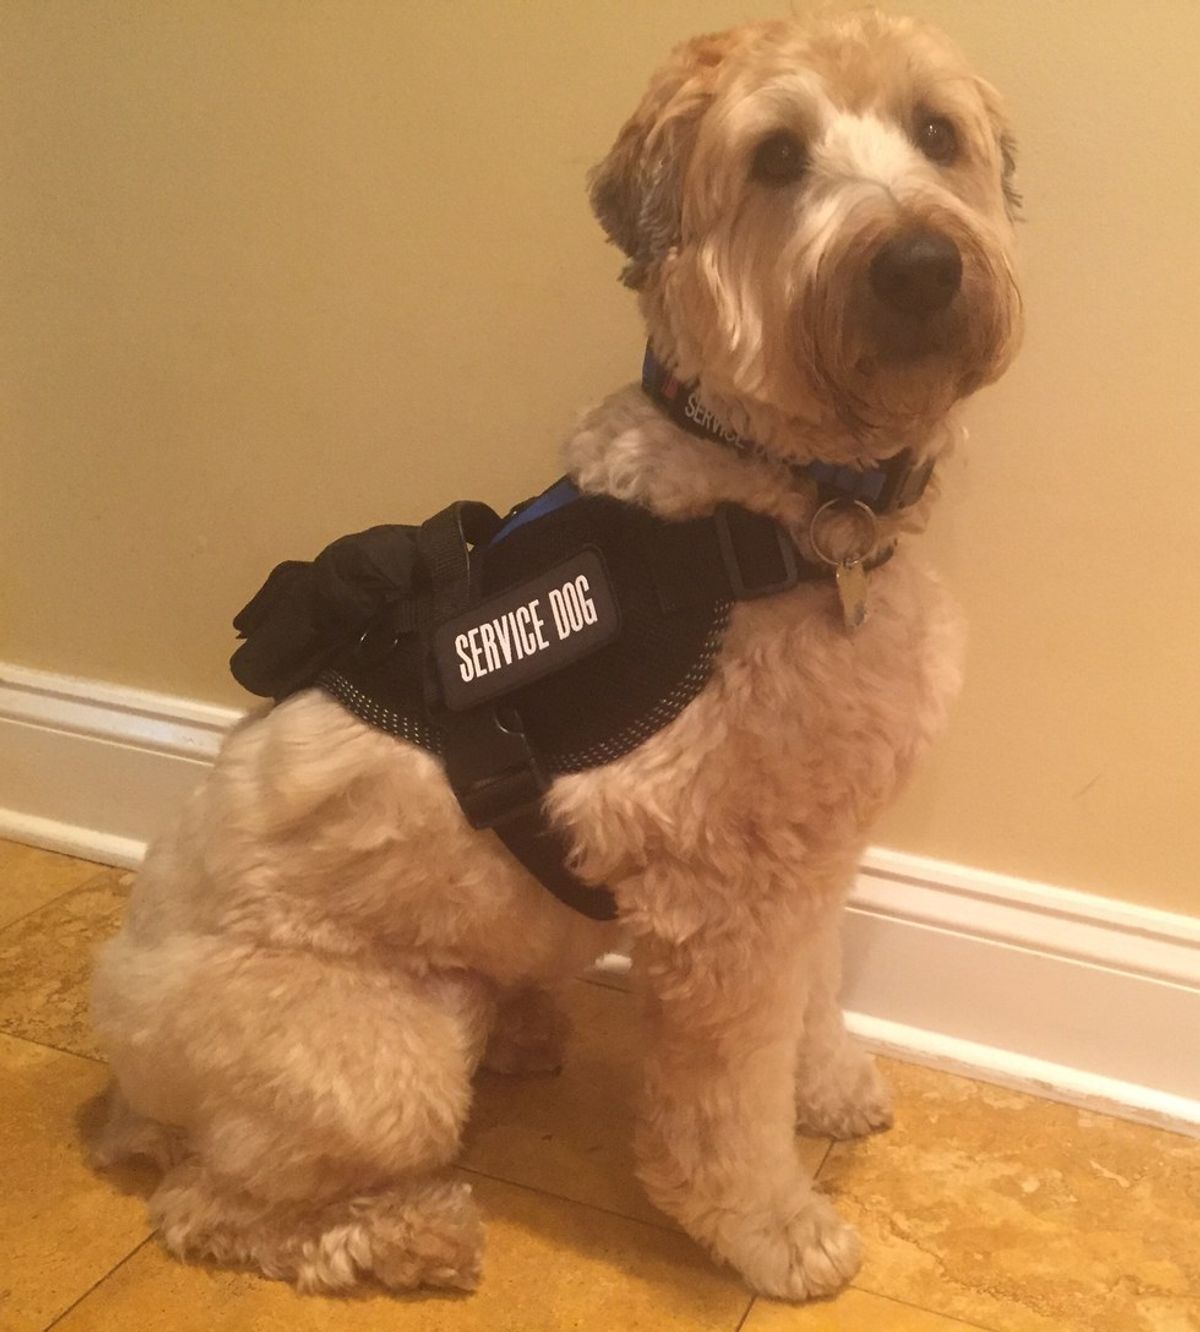 My Dog's Journey To Become A Service Dog